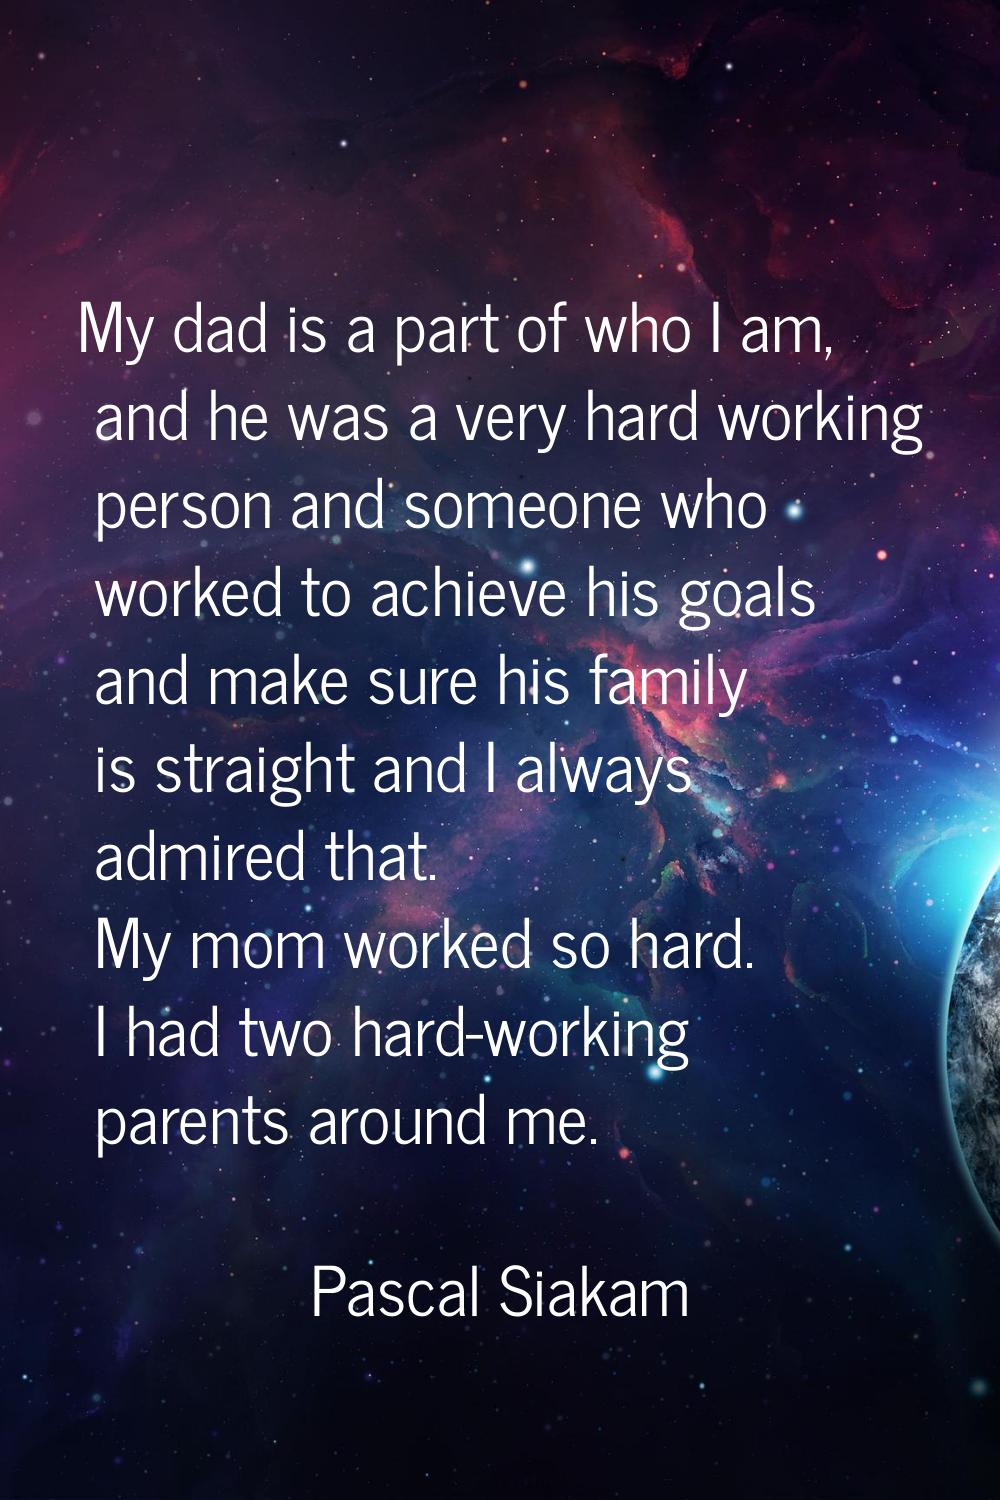 My dad is a part of who I am, and he was a very hard working person and someone who worked to achie